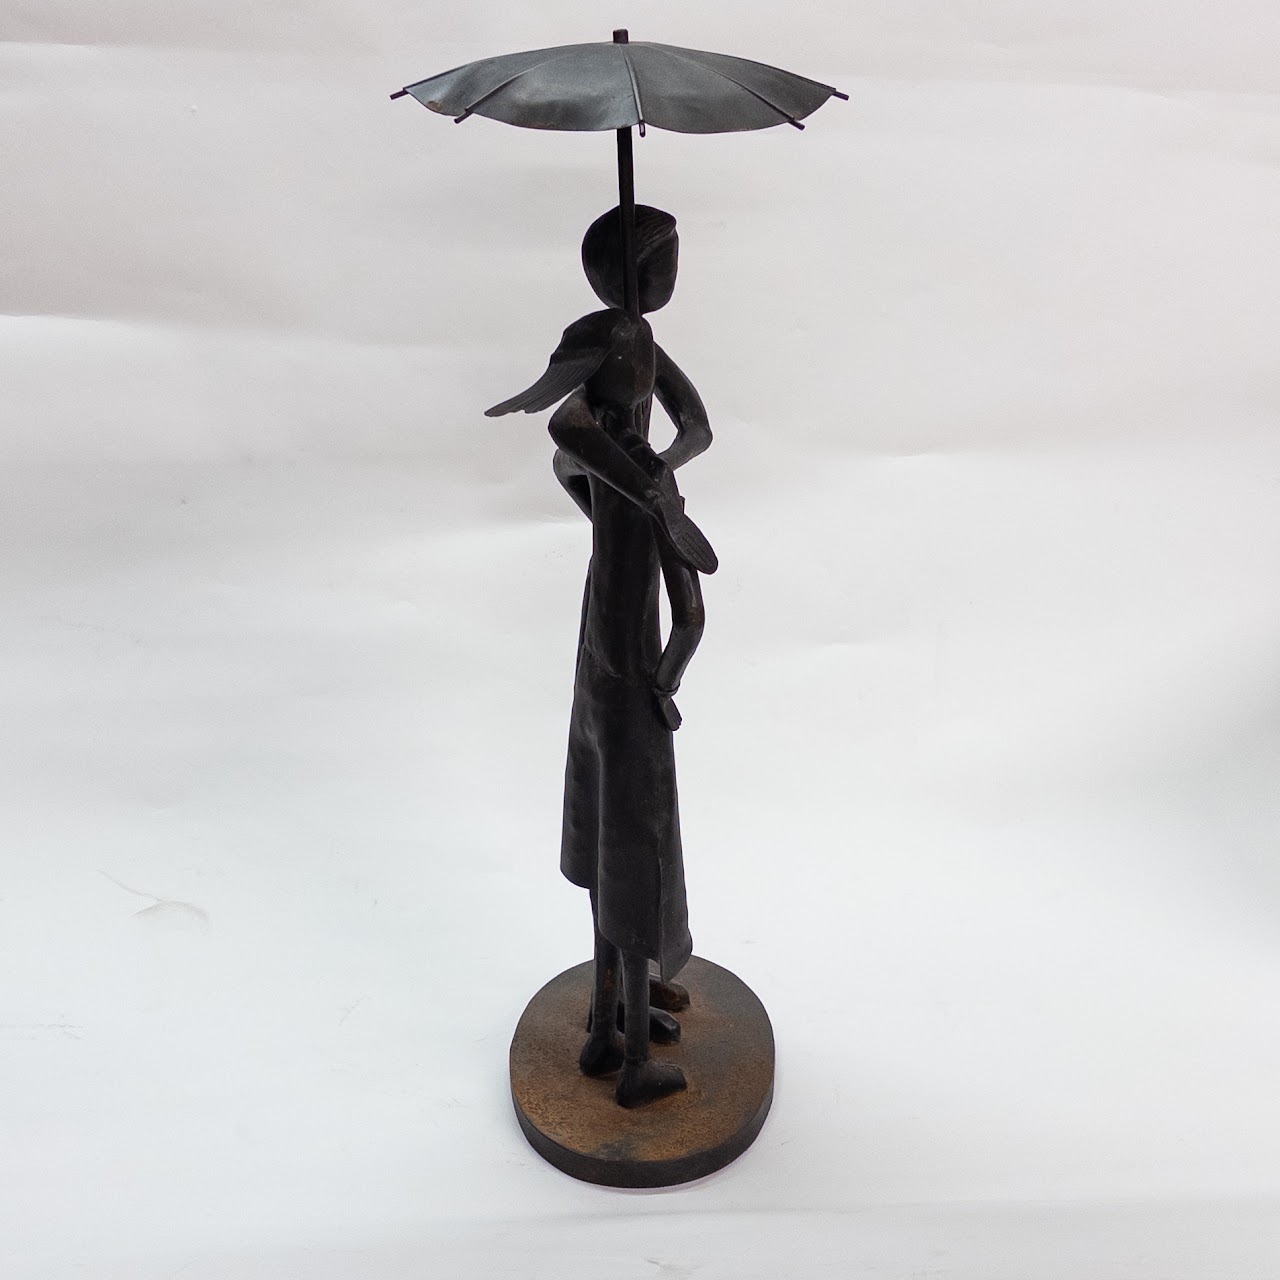 Distressed Metal Garden Statue of Two People in the Rain